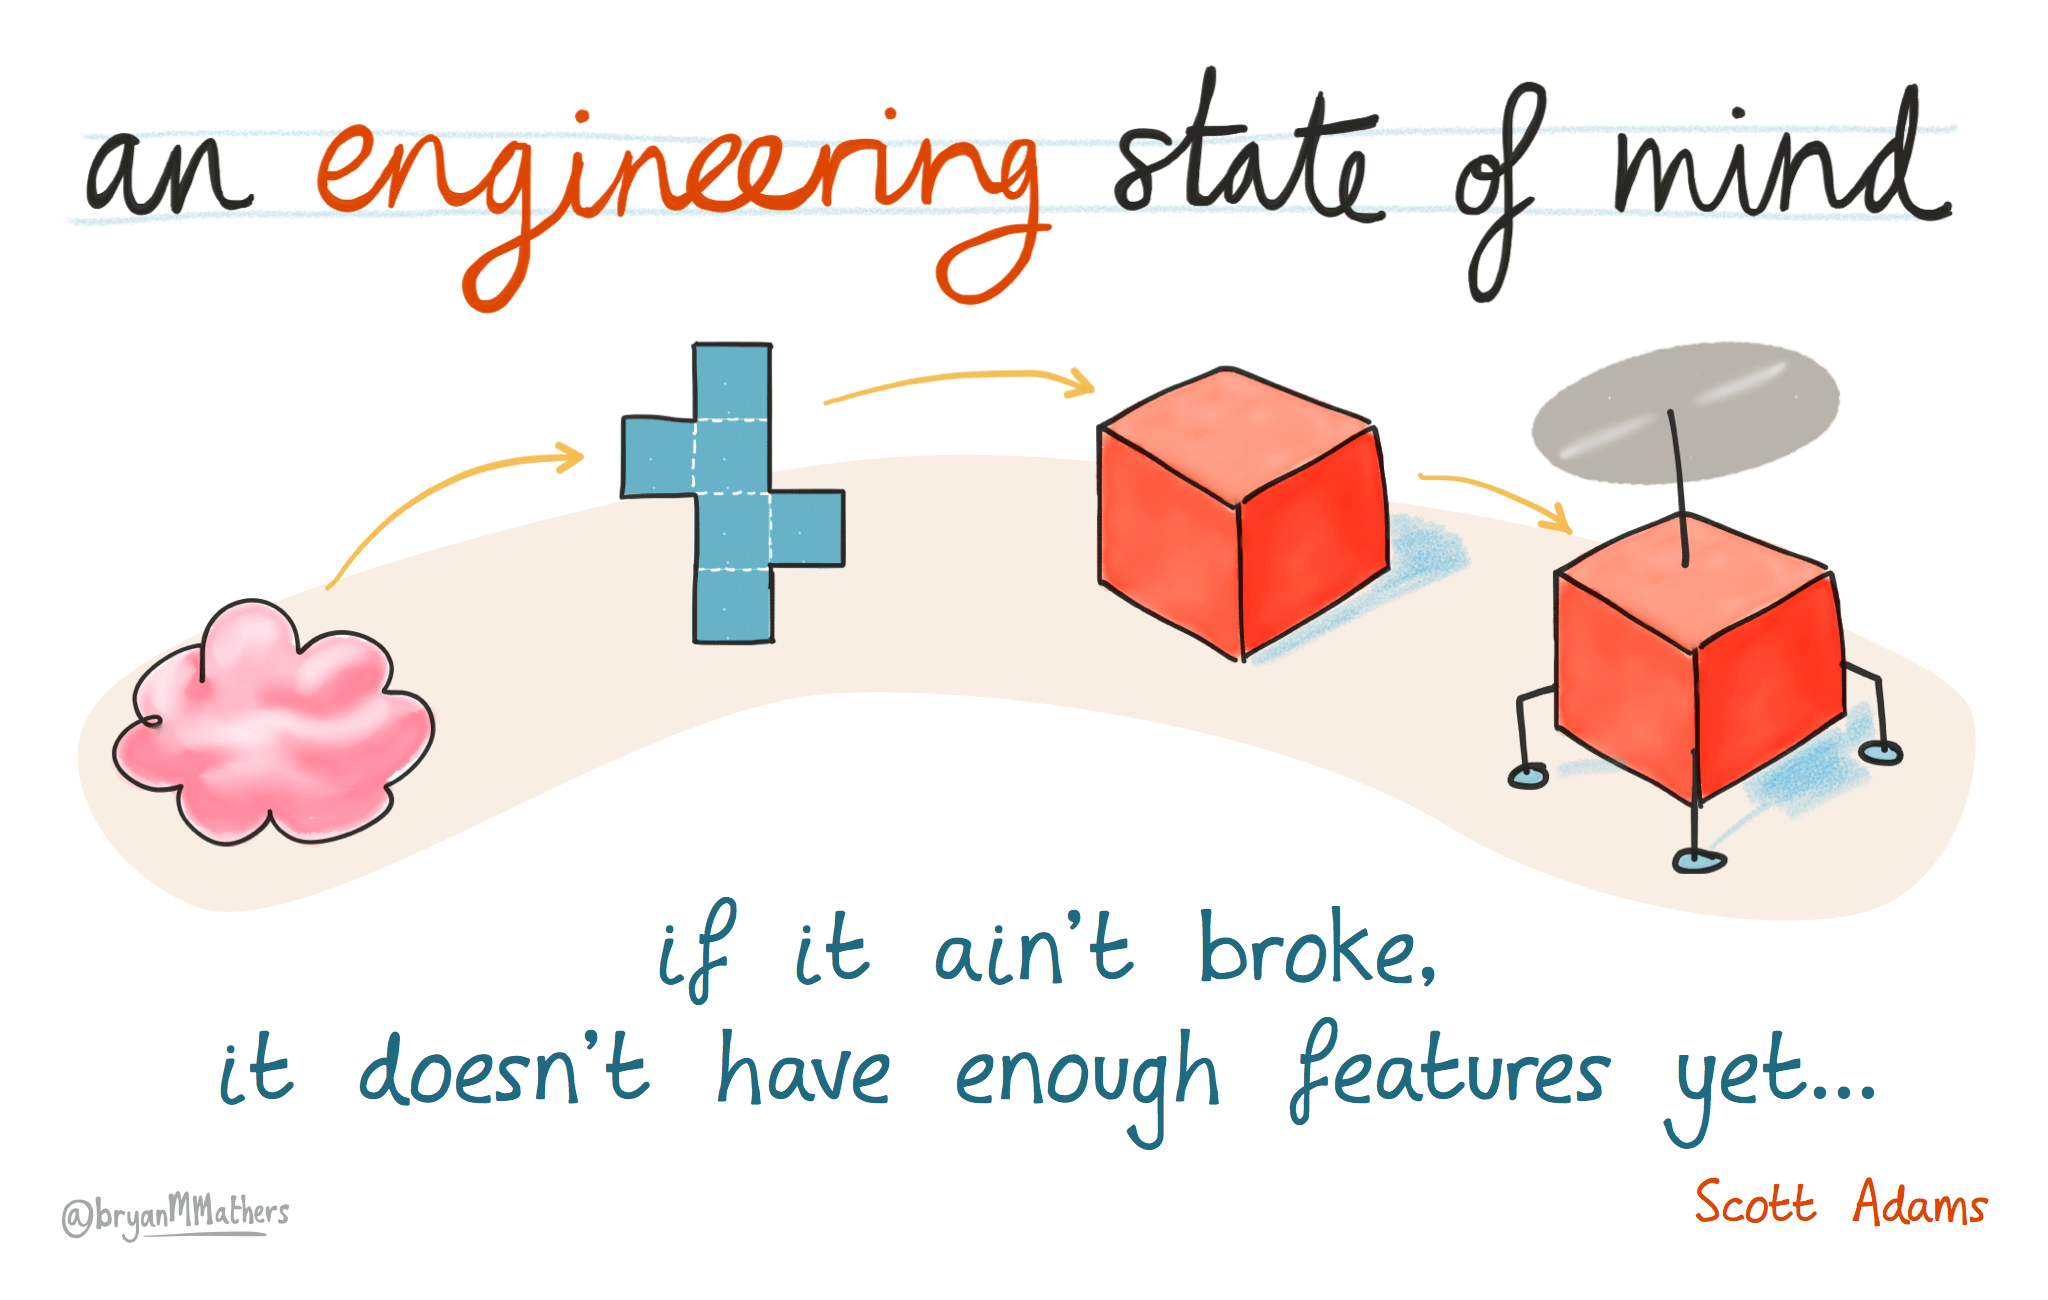 If it ain’t broke it doesn’t have enough features yet. Adding more features to software doesn’t necessarily make it better. Likewise, adding more pages and content to your CV or résumé won’t always improve it. It’s often better to be precise and concise, rather than bloated and potentially more buggy. An engineering state of mind by Visual Thinkery is licensed under CC-BY-ND, with help from Dilbert cartoonist Scott Adams